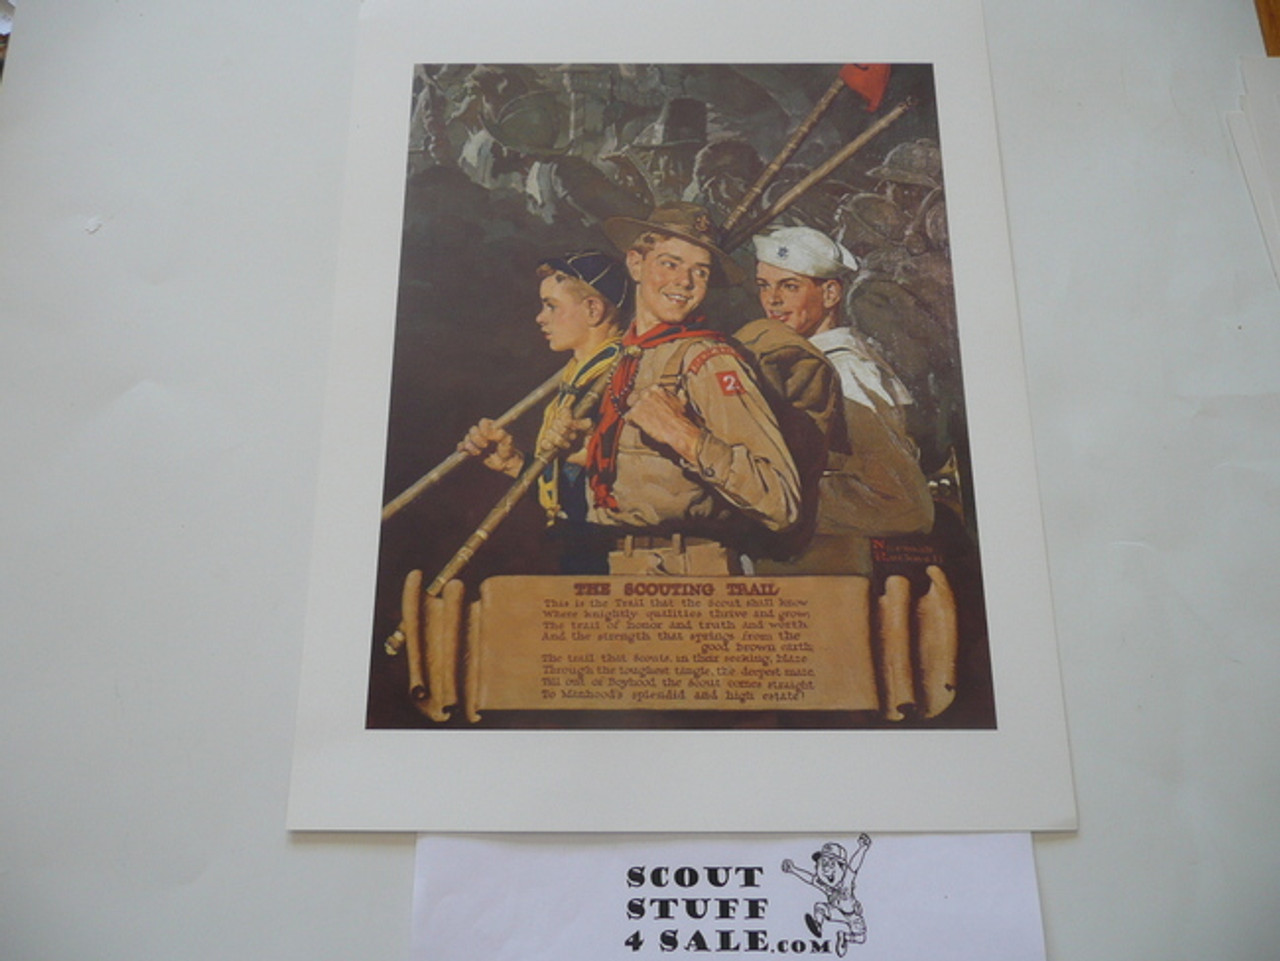 Norman Rockwell, The Scouting Trail, 11x14 On Heavy Cardstock, slight dogeared corners and/or watermark but print is unaffected and will frame or show fine